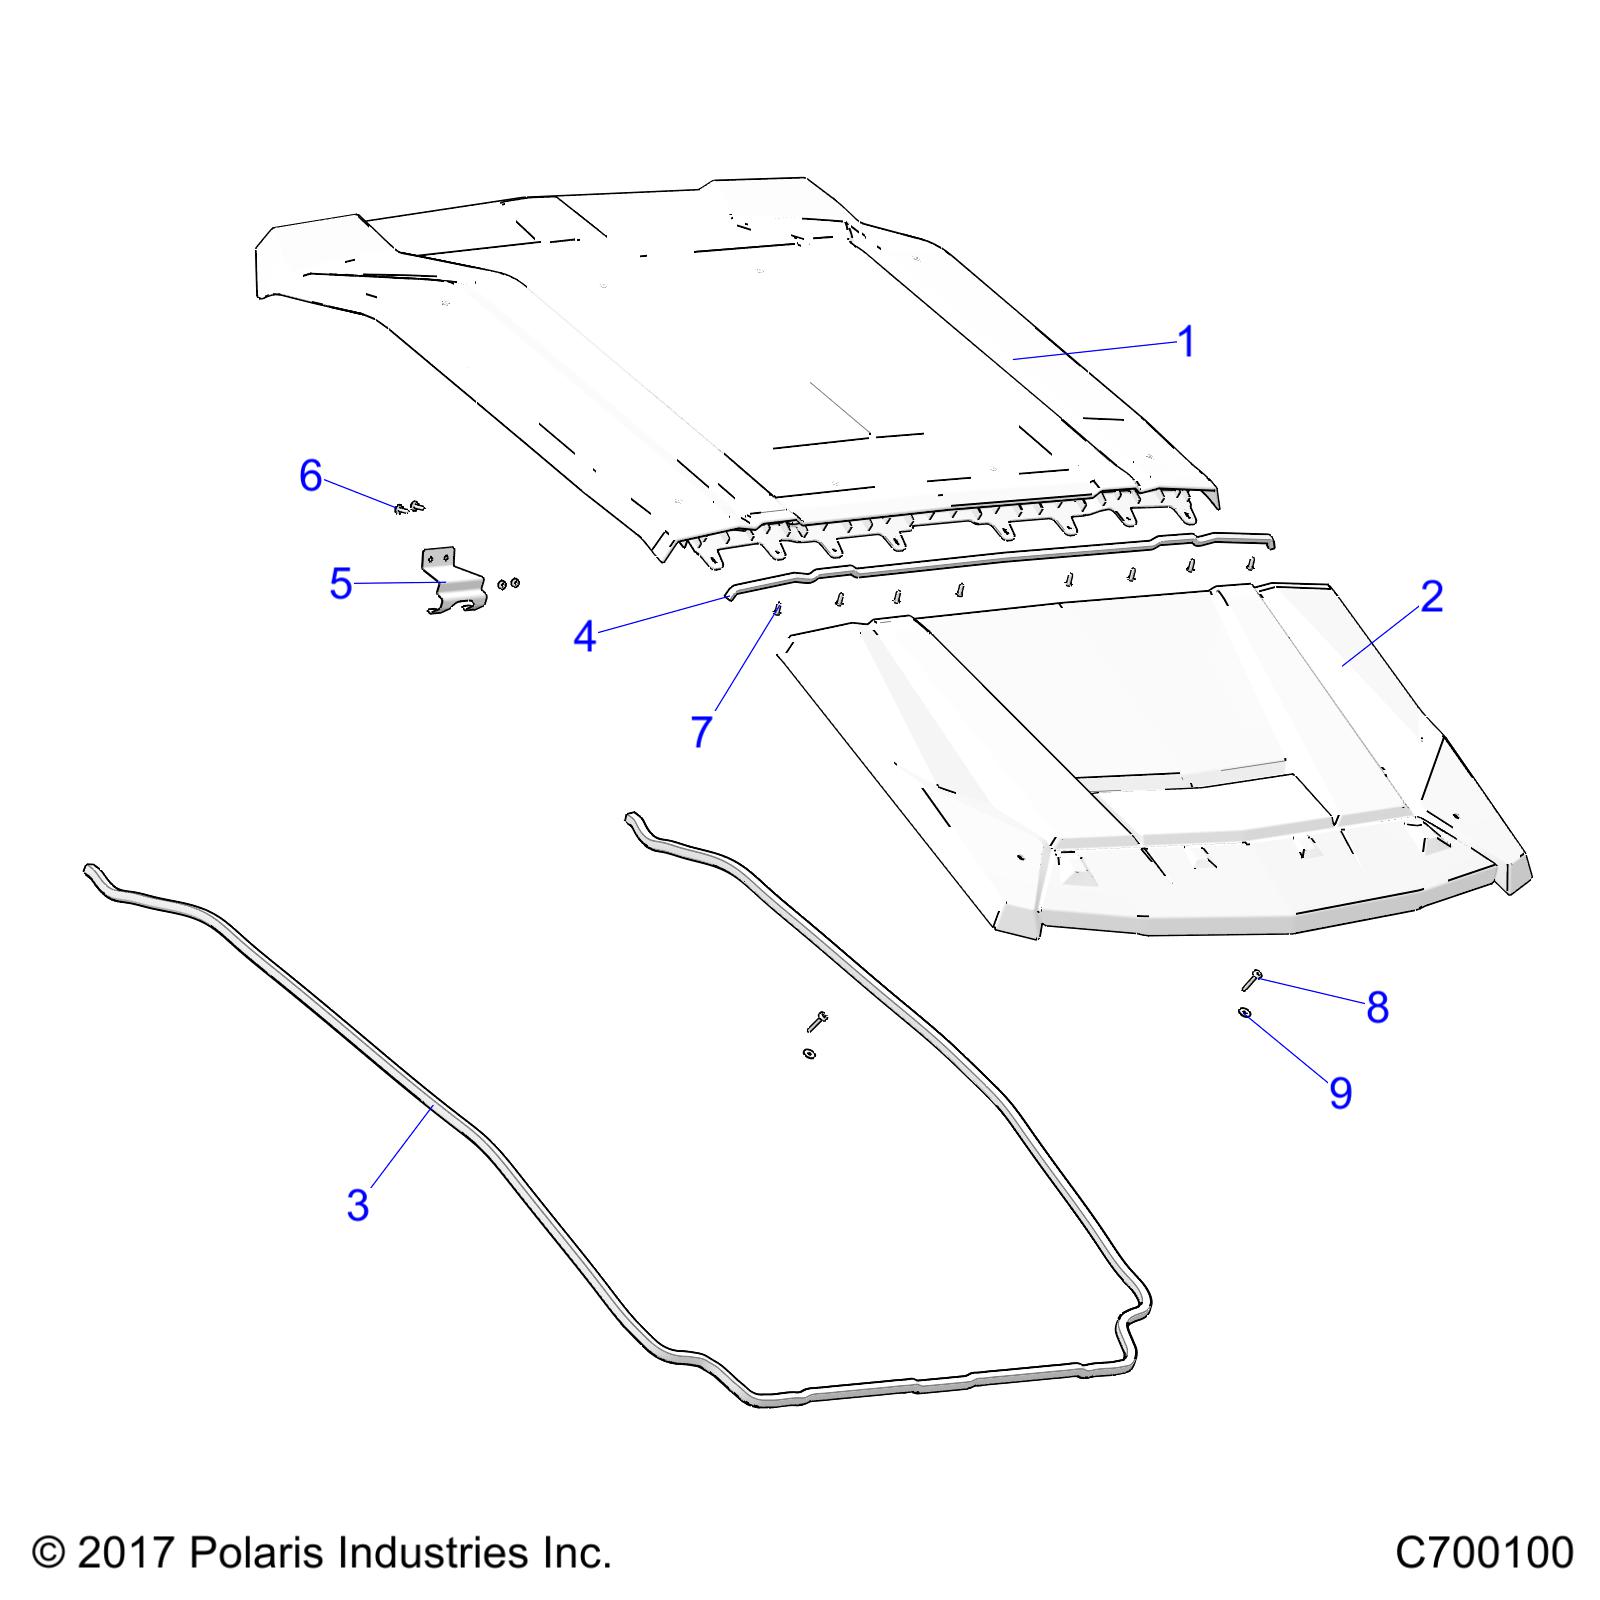 Part Number : 5261454 BRK-REAR ROOF SPORT XOVR